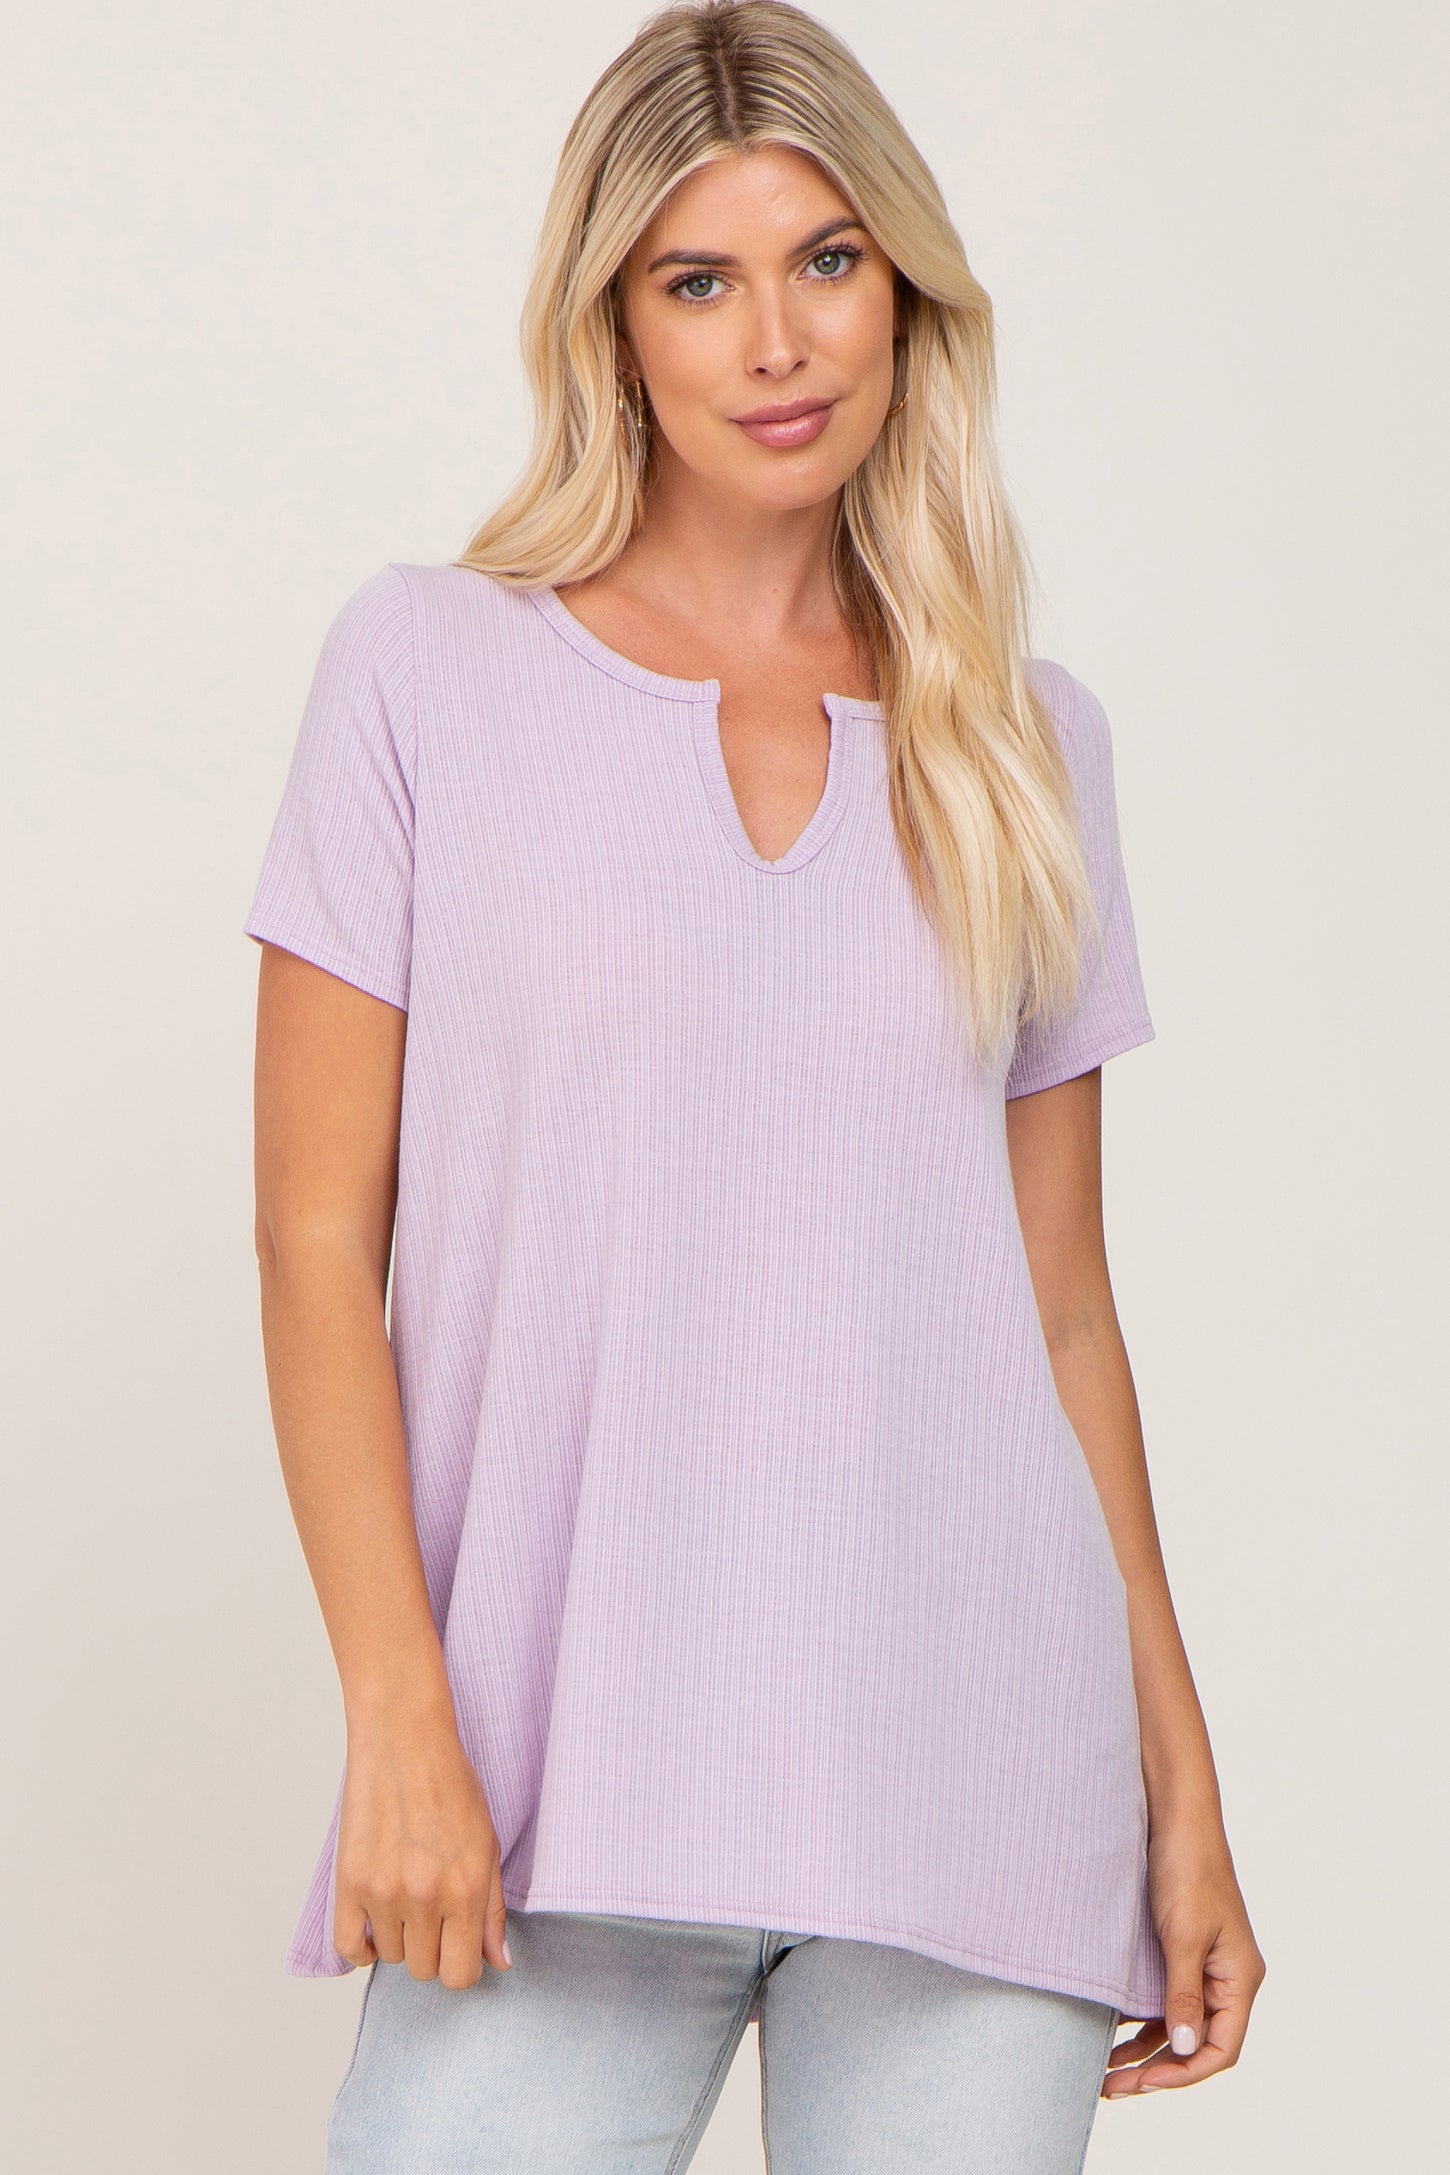 Lavender Ribbed Short Sleeve Maternity Top